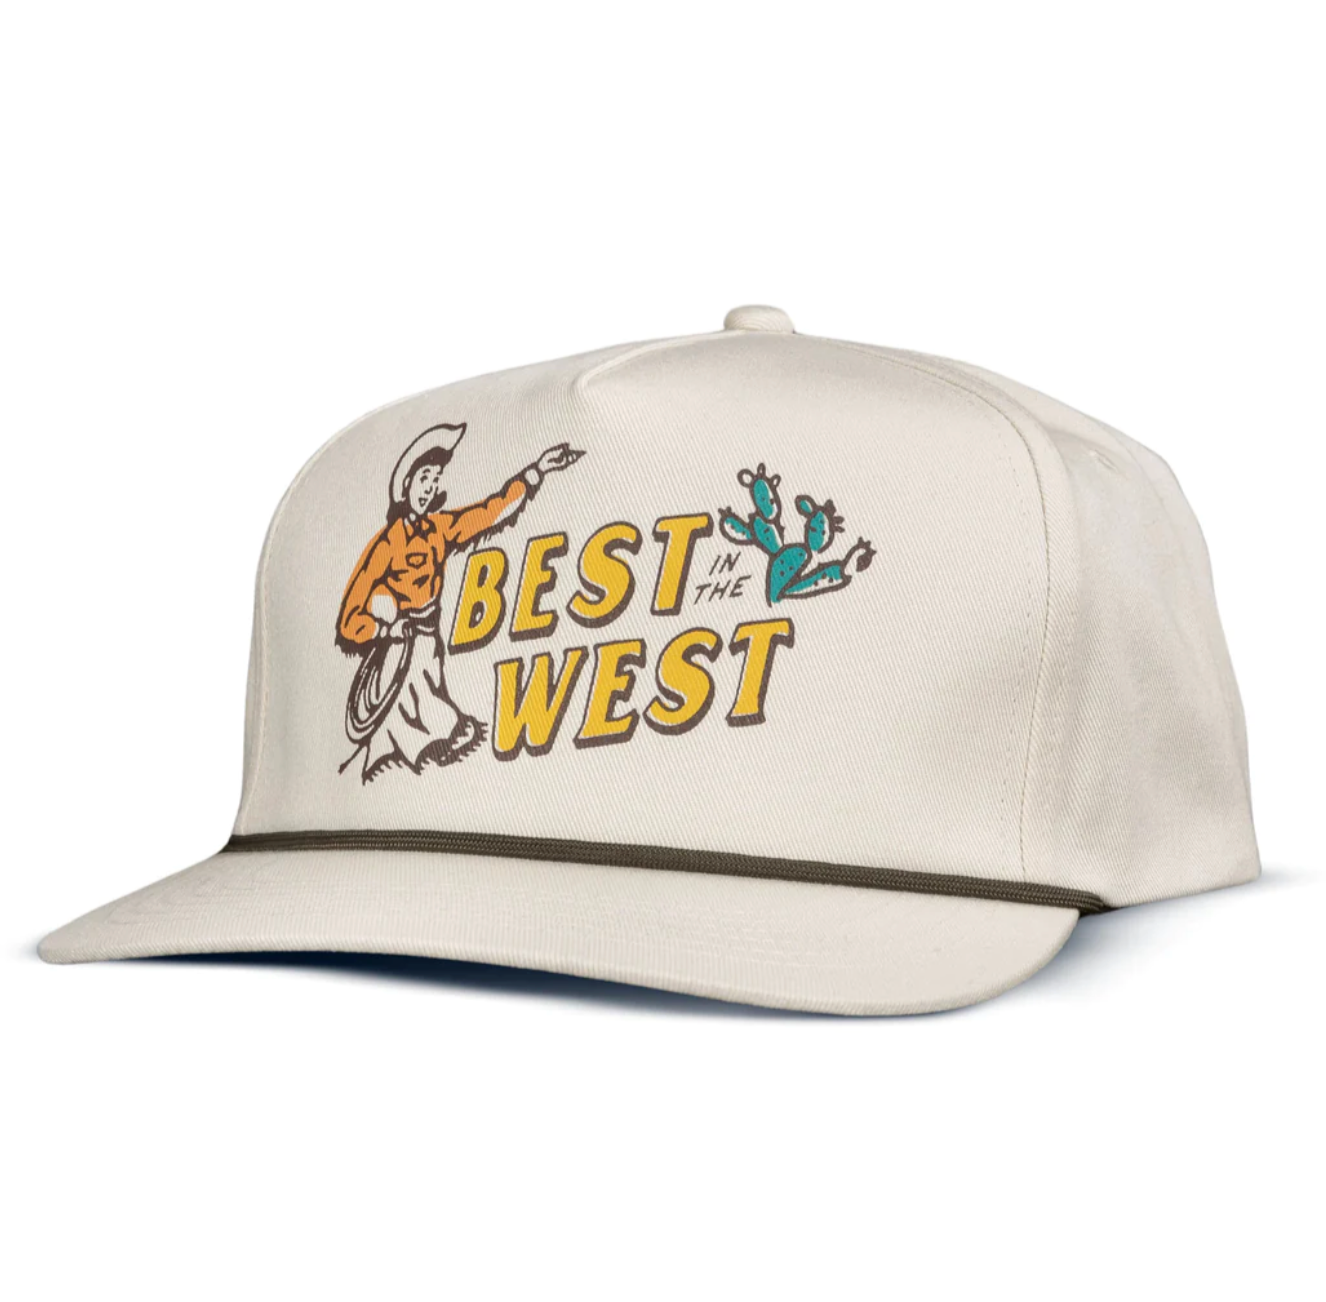 BEST IN THE WEST HAT